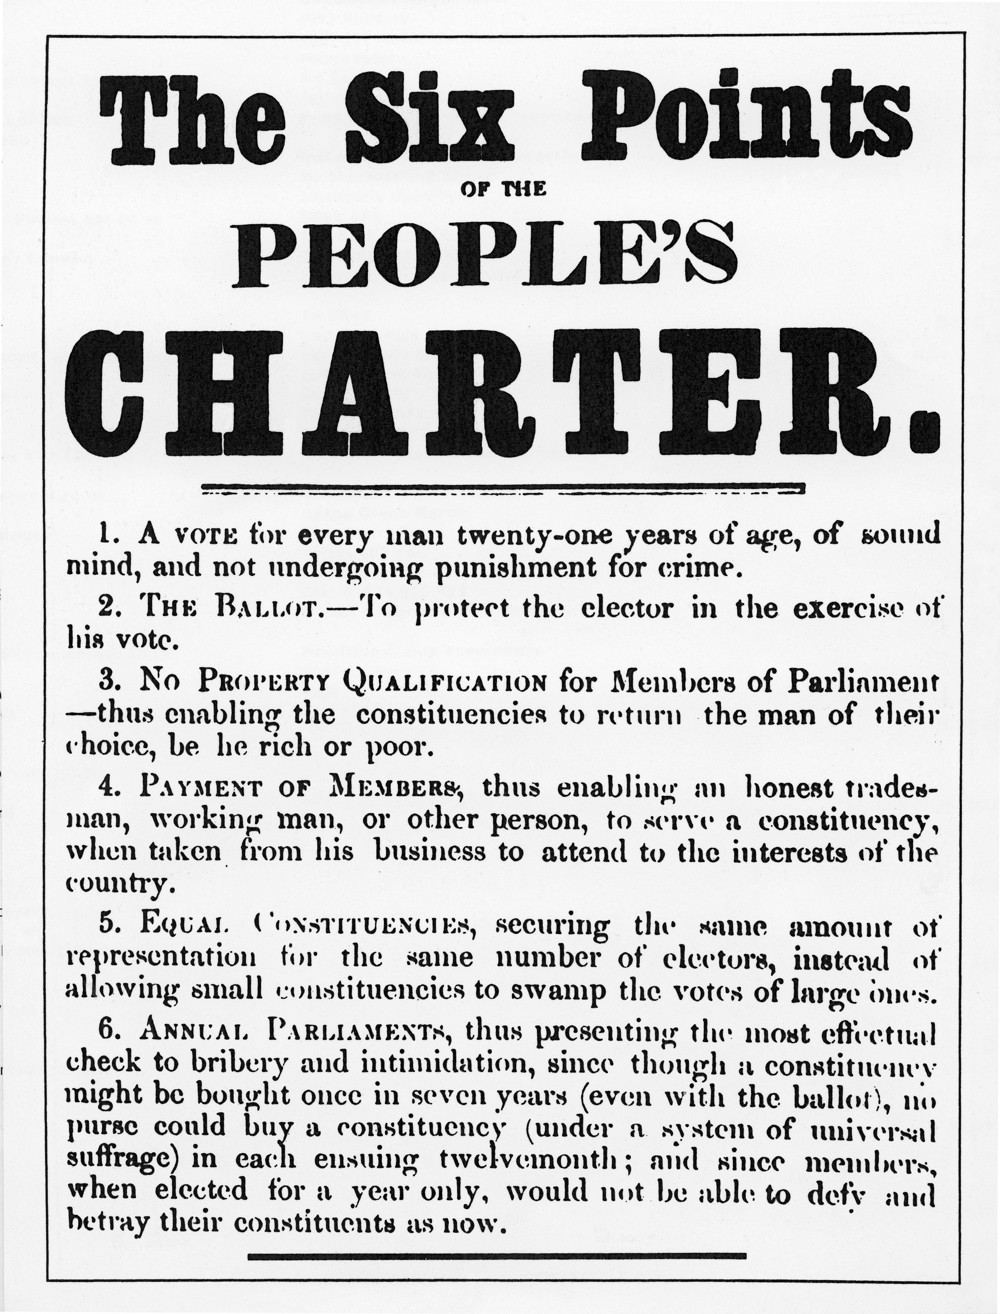 The Six Points of the People’s Charter, lithograph print.